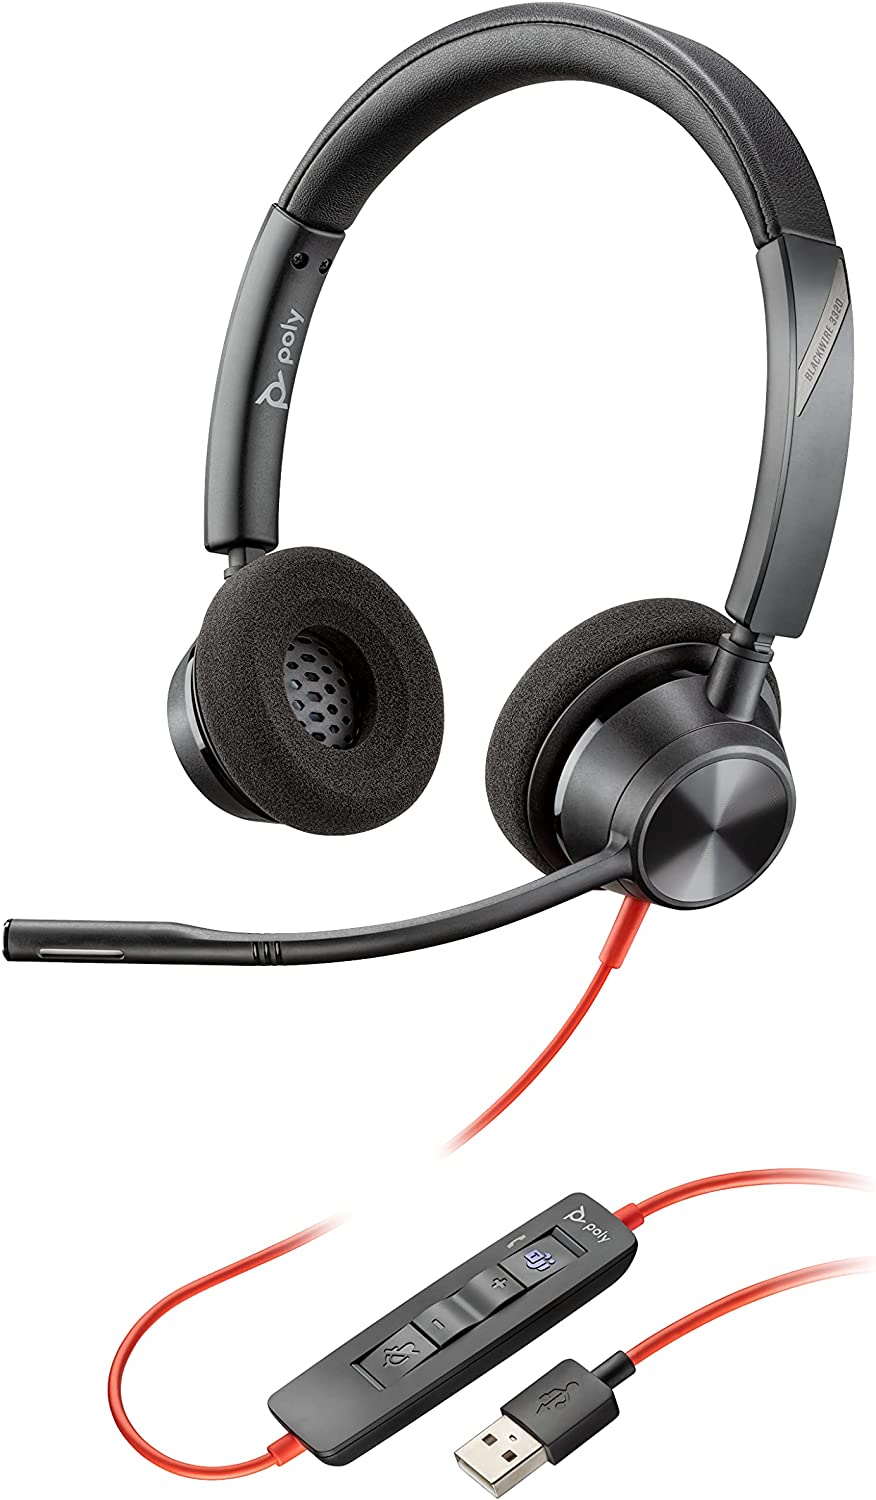 Poly Plantronics - Blackwire 3320 - Wired, Dual-Ear (Stereo) Headset with Boom Mic - USB-A to connect to your PC, Mac or Cell Phone - Works with Teams (Certified), Zoom &amp; more Normal Dual-Ear Headset